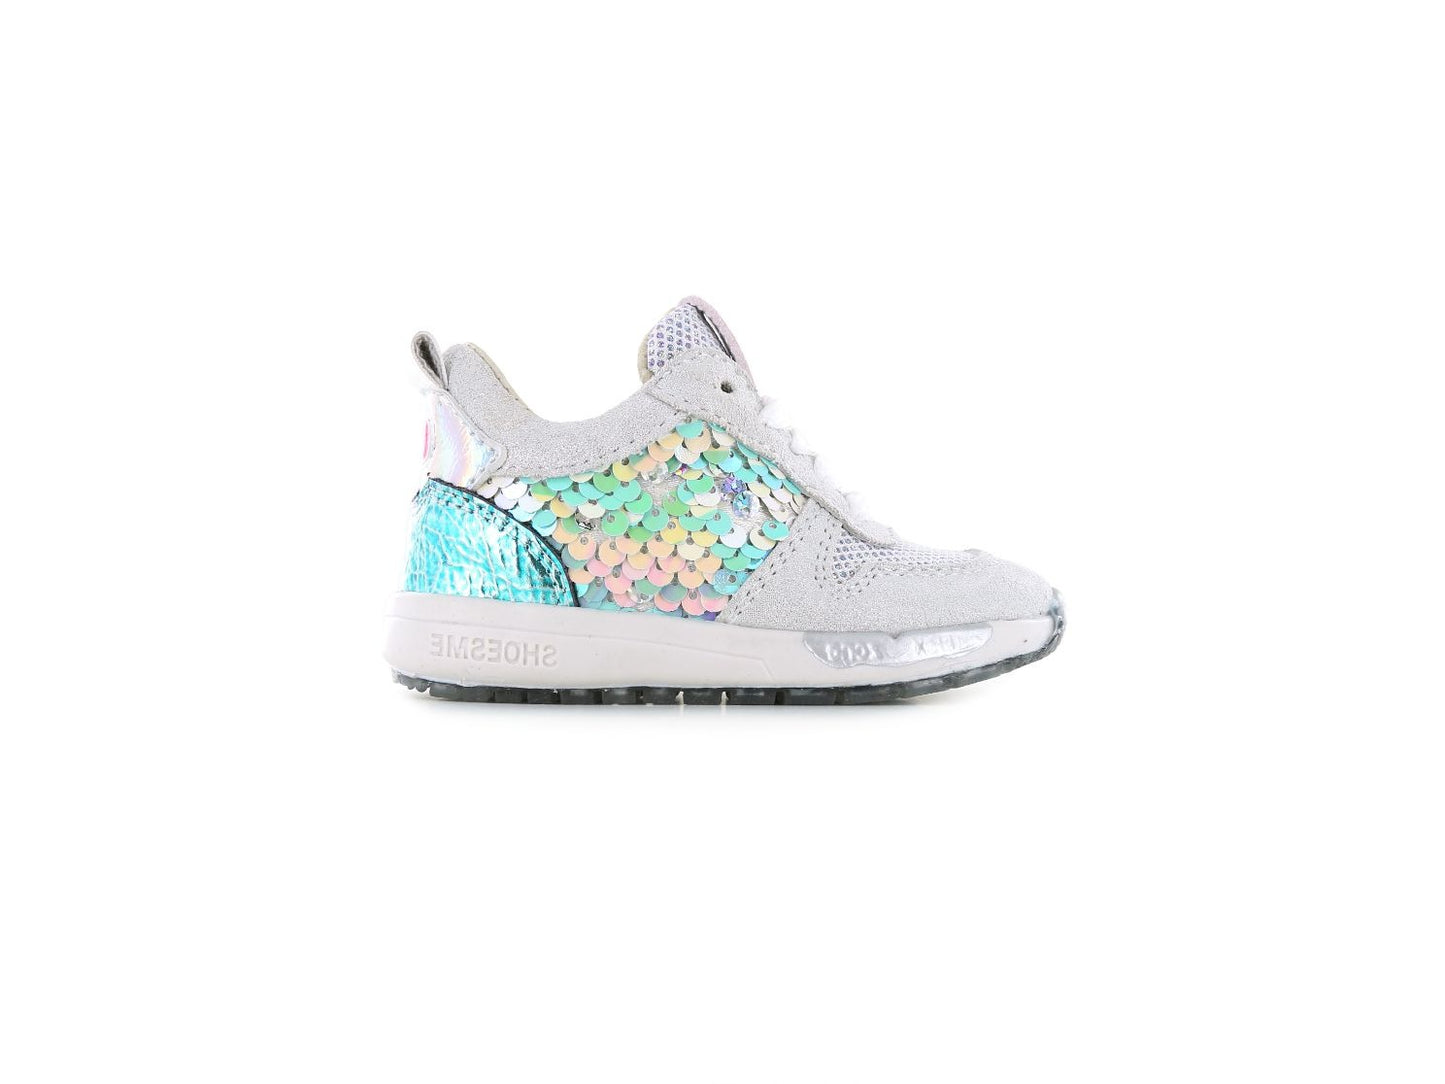 A girl's trainer by Shoesme, style Run-Flex RF24SO42-A, in silver and iridescent light blue with sequin panel to the side. Lace up fastening. Right side view.